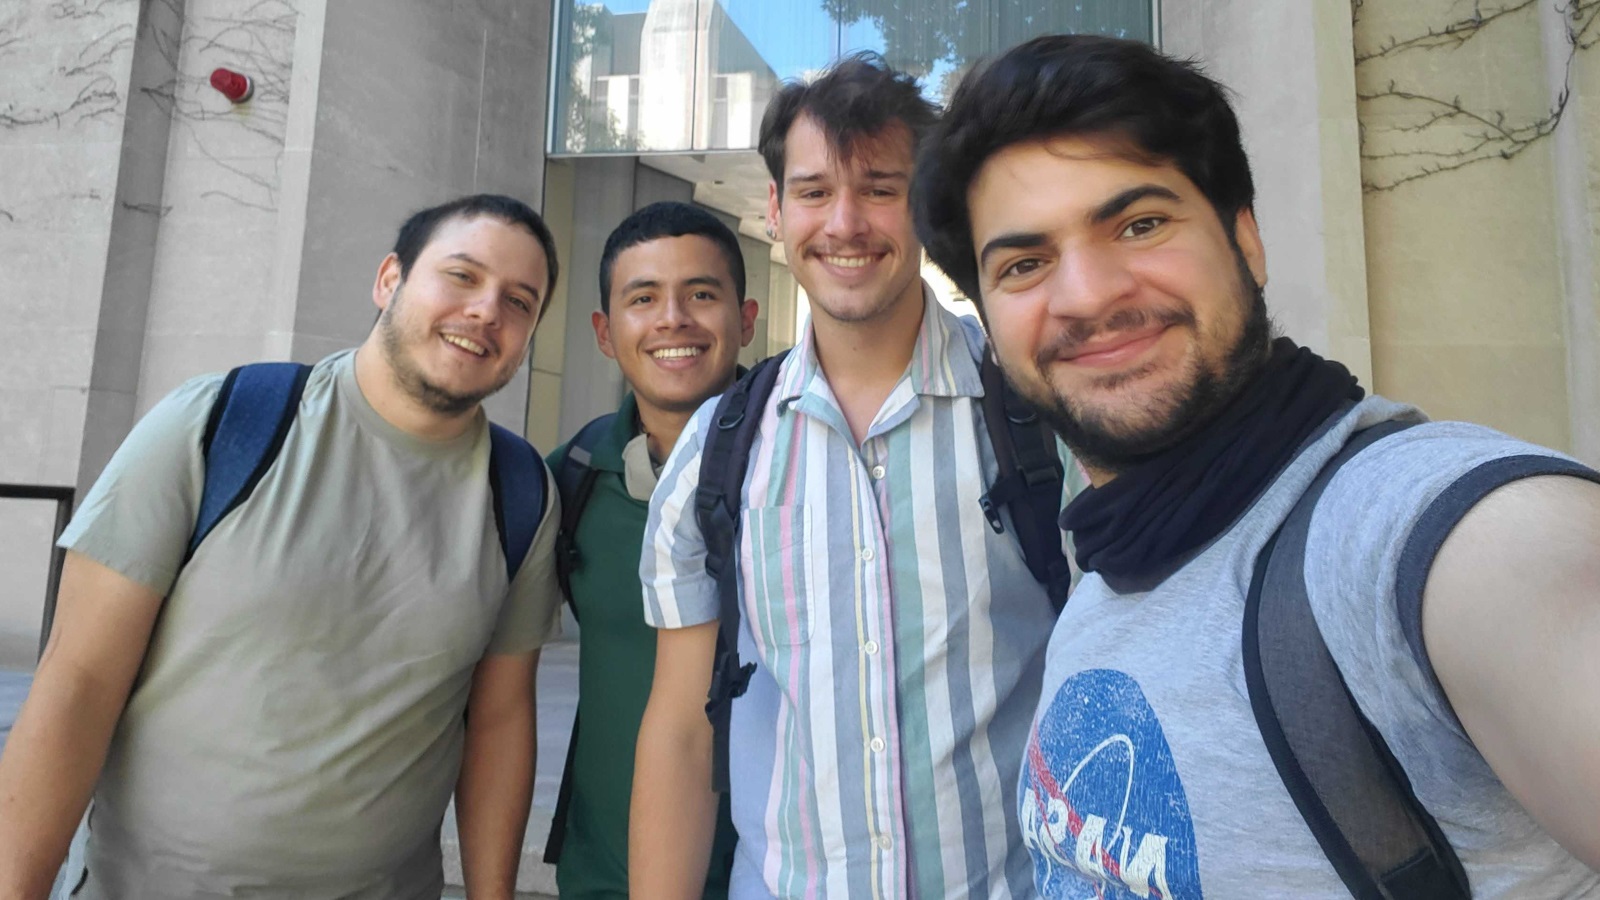 Argonne mentor Jose M Monsalve Diaz with his students Rafael A Herrera Guaitero, Dawson Fox and Diego A. Roa Perdomo. Herrera and Roa participated in the program from the University of Delaware. 